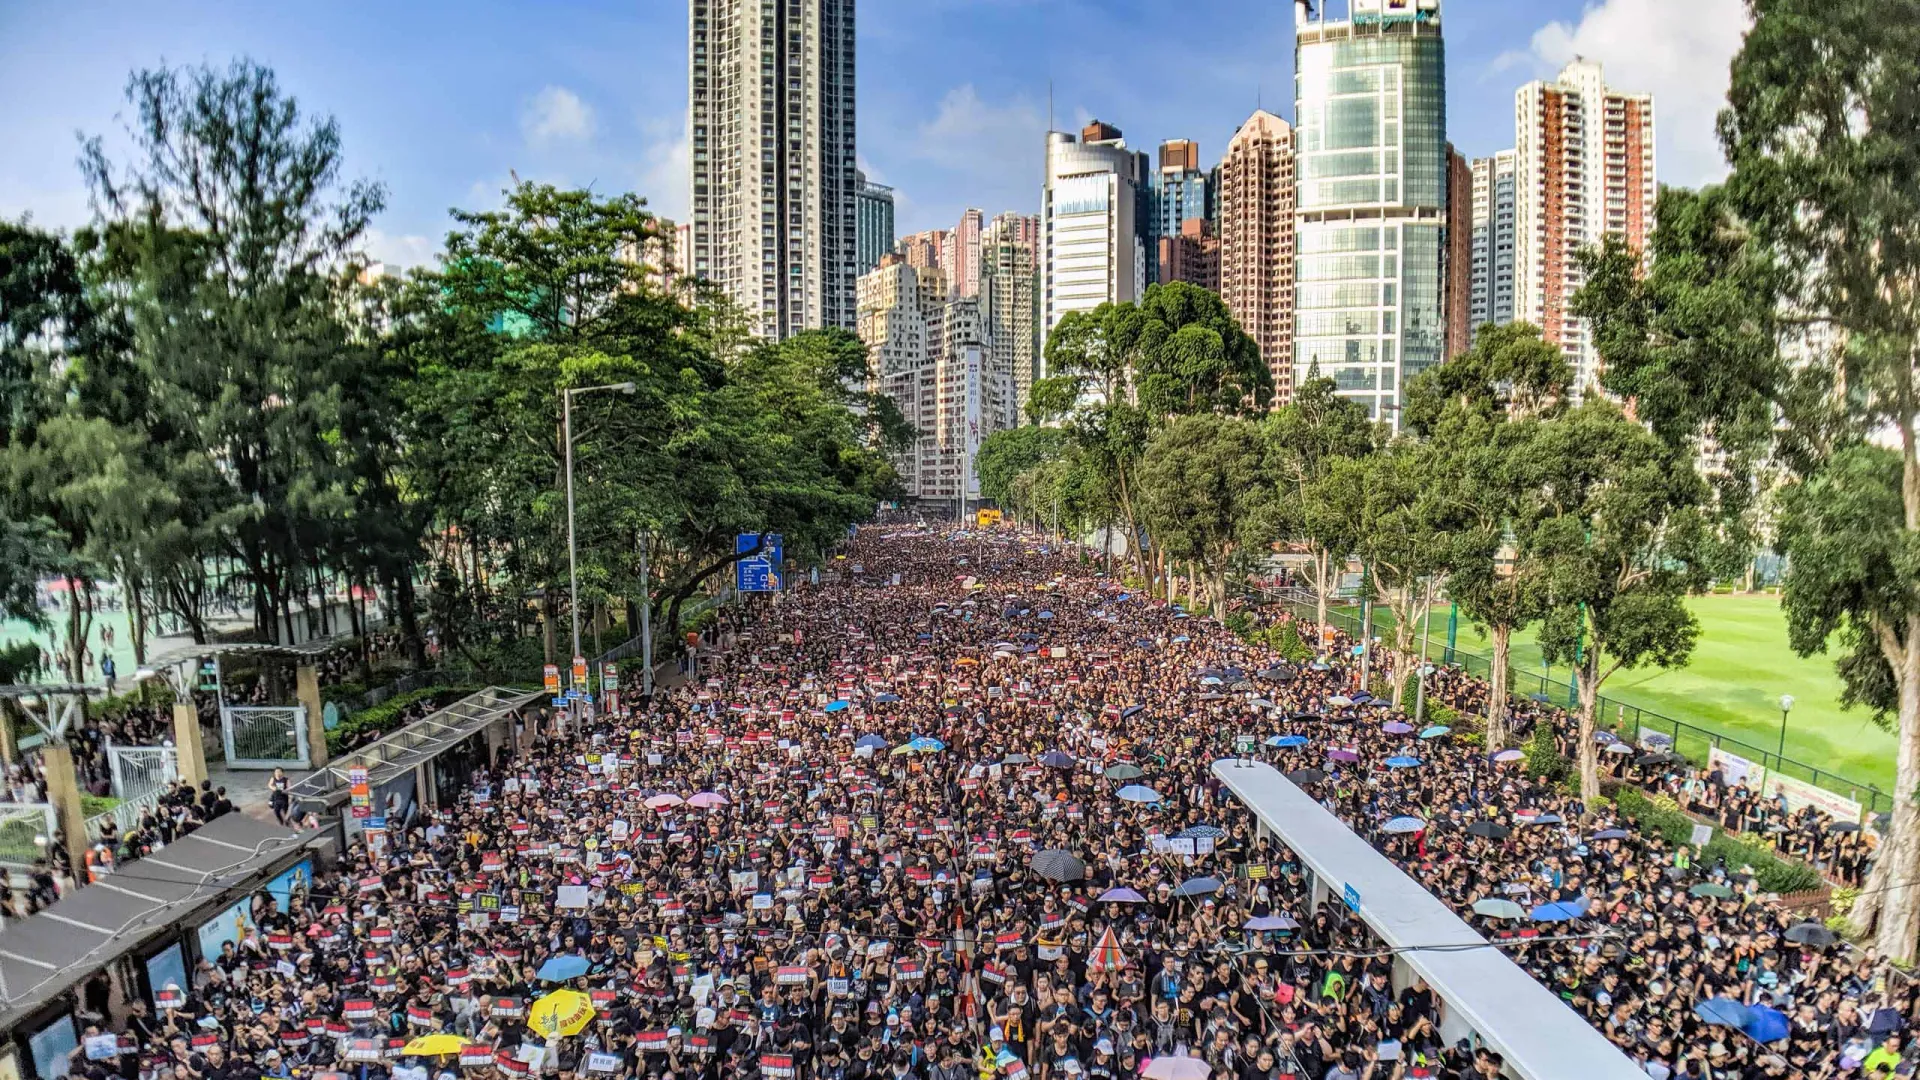 A protest in Hong Kong on June 16, 2021. CSUSB’s Modern China Lecture Series will host two talks, one today at 5:30 p.m. and at 10 a.m. Tuesday. Both will be on Zoom. Photo by Studio Incento/WikiMedia Commons.